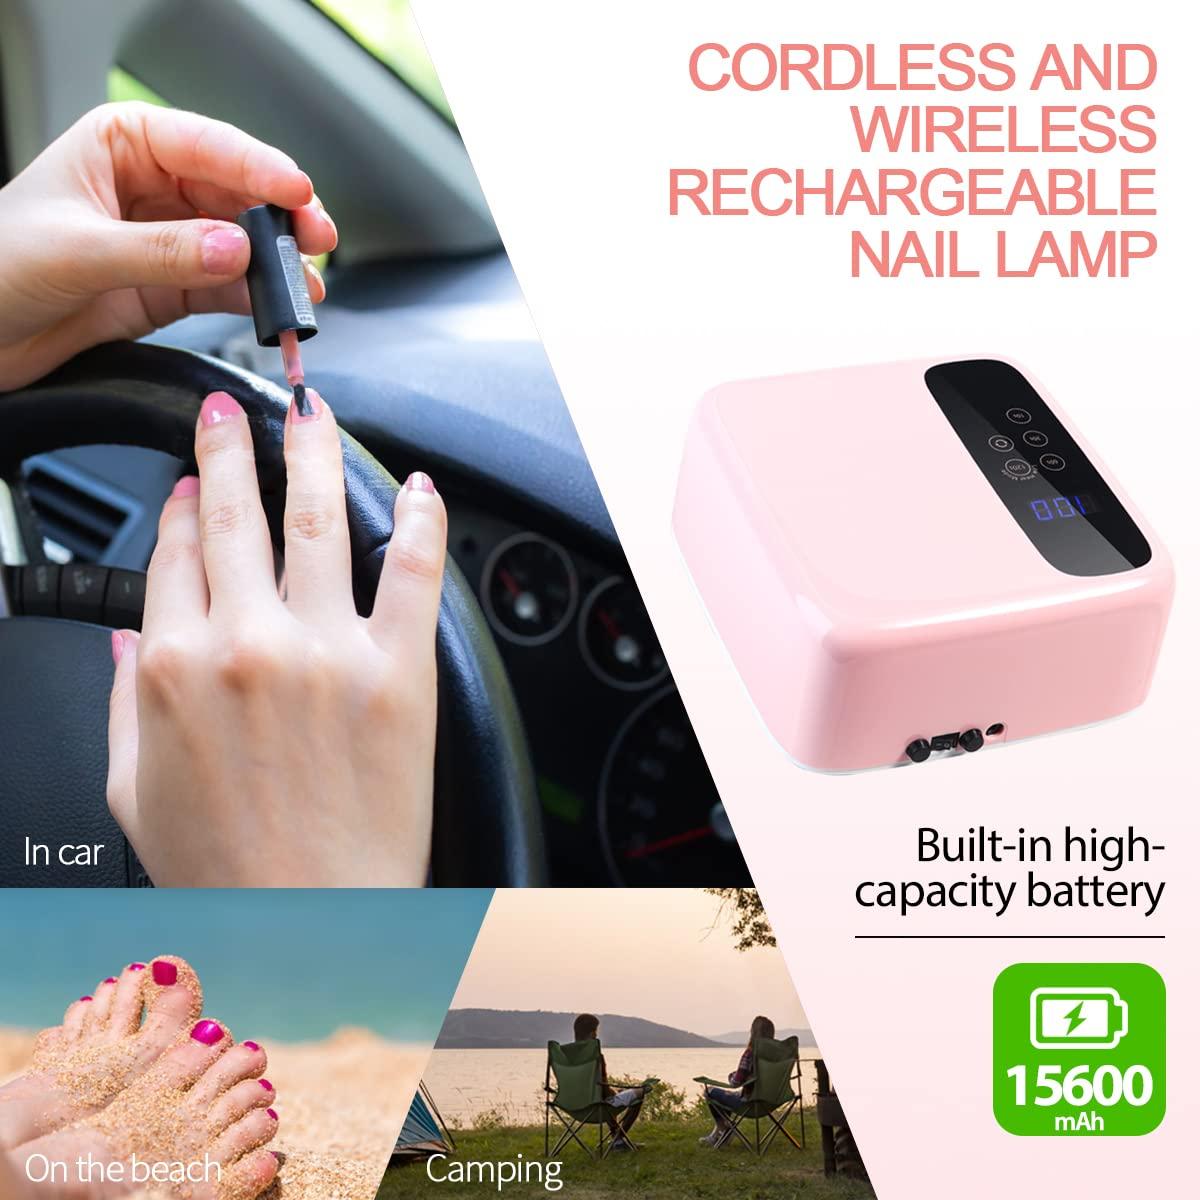 Cordless Lighting - Wireless - Rechargeable